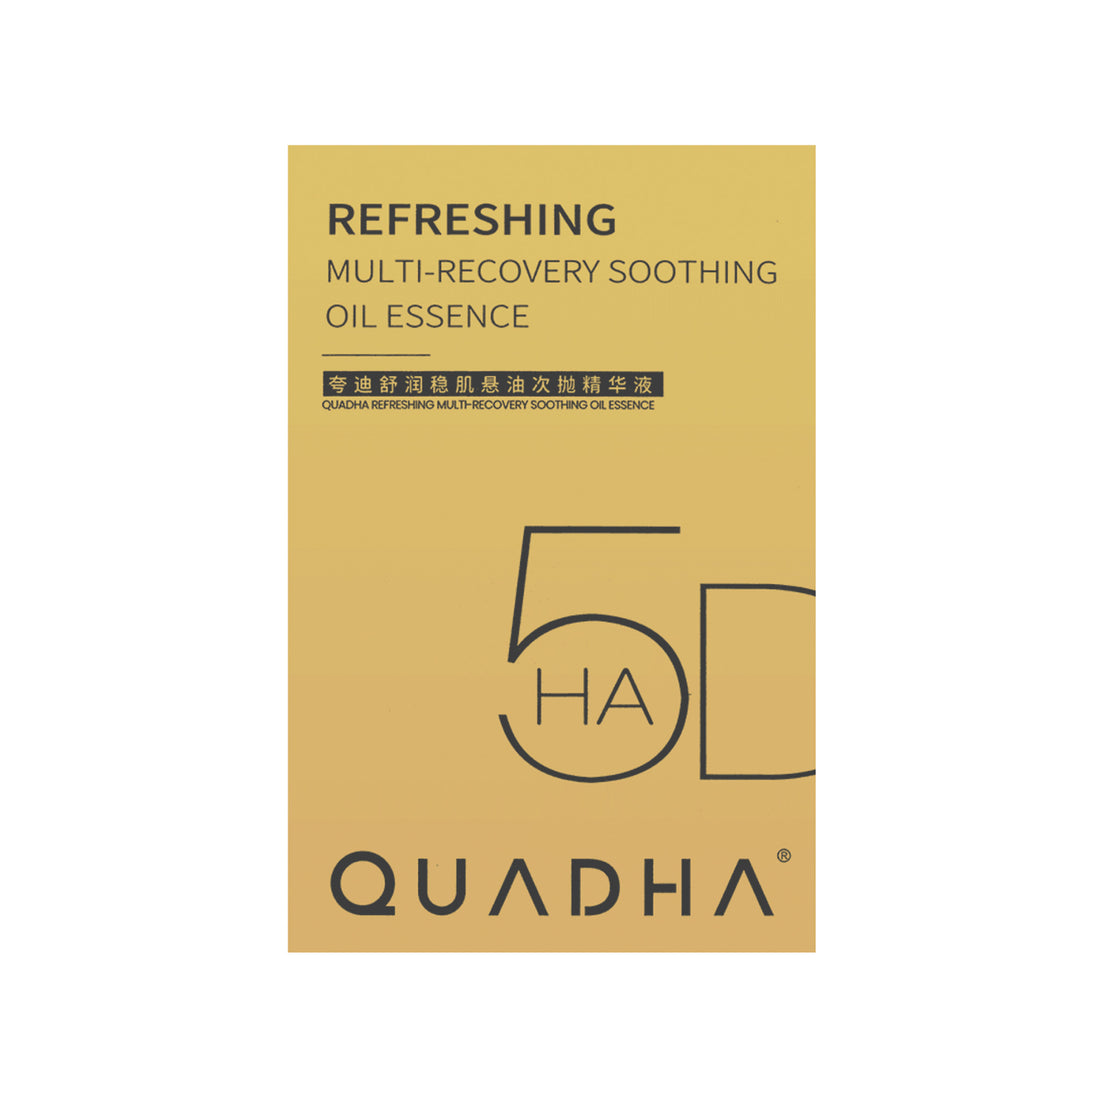 QUADHA Multi-Recovery Soothing Oil Essence 5pcs